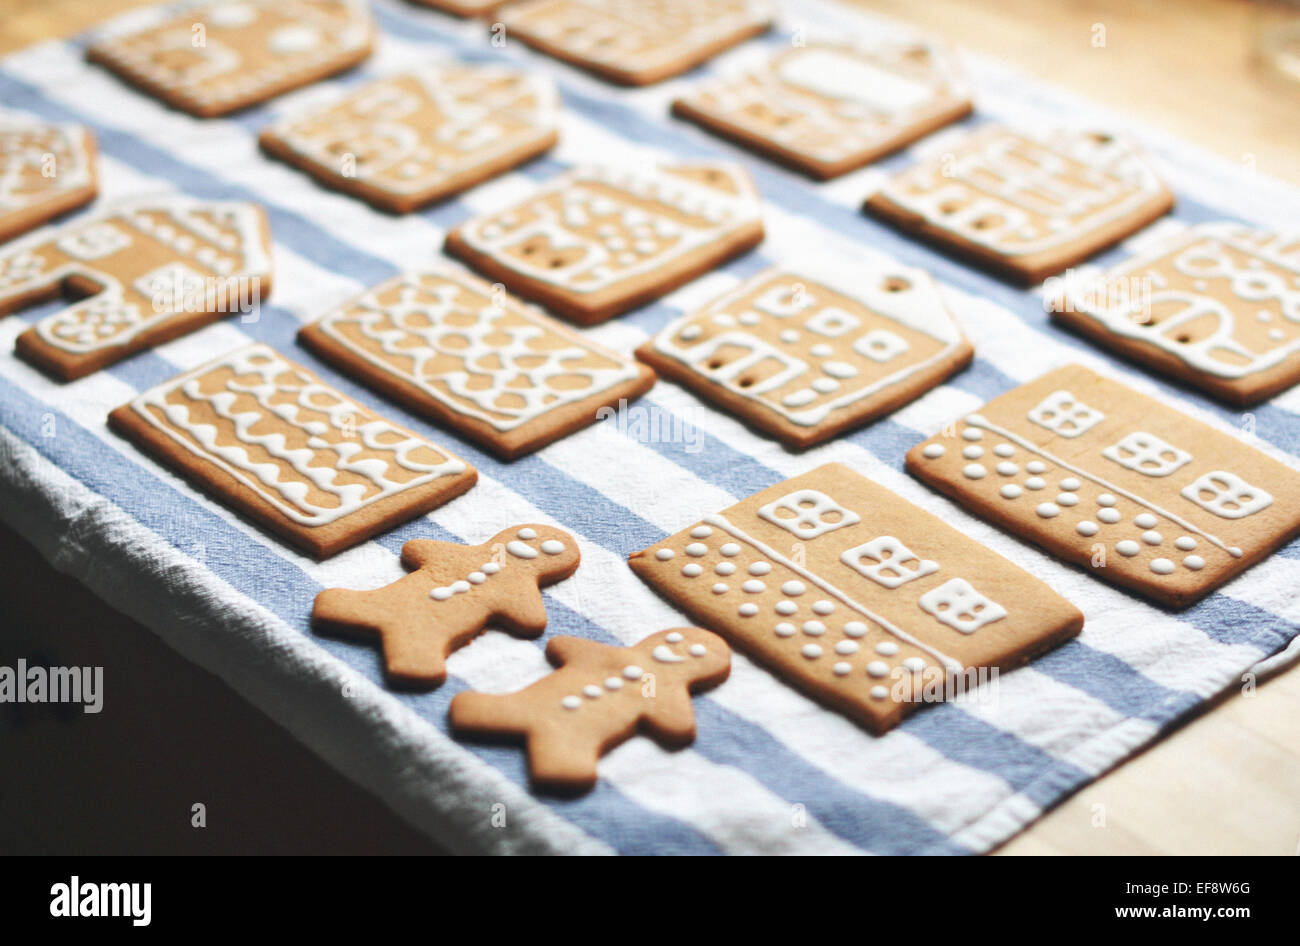 Gingerbread cookies in rows on striped cloth Stock Photo